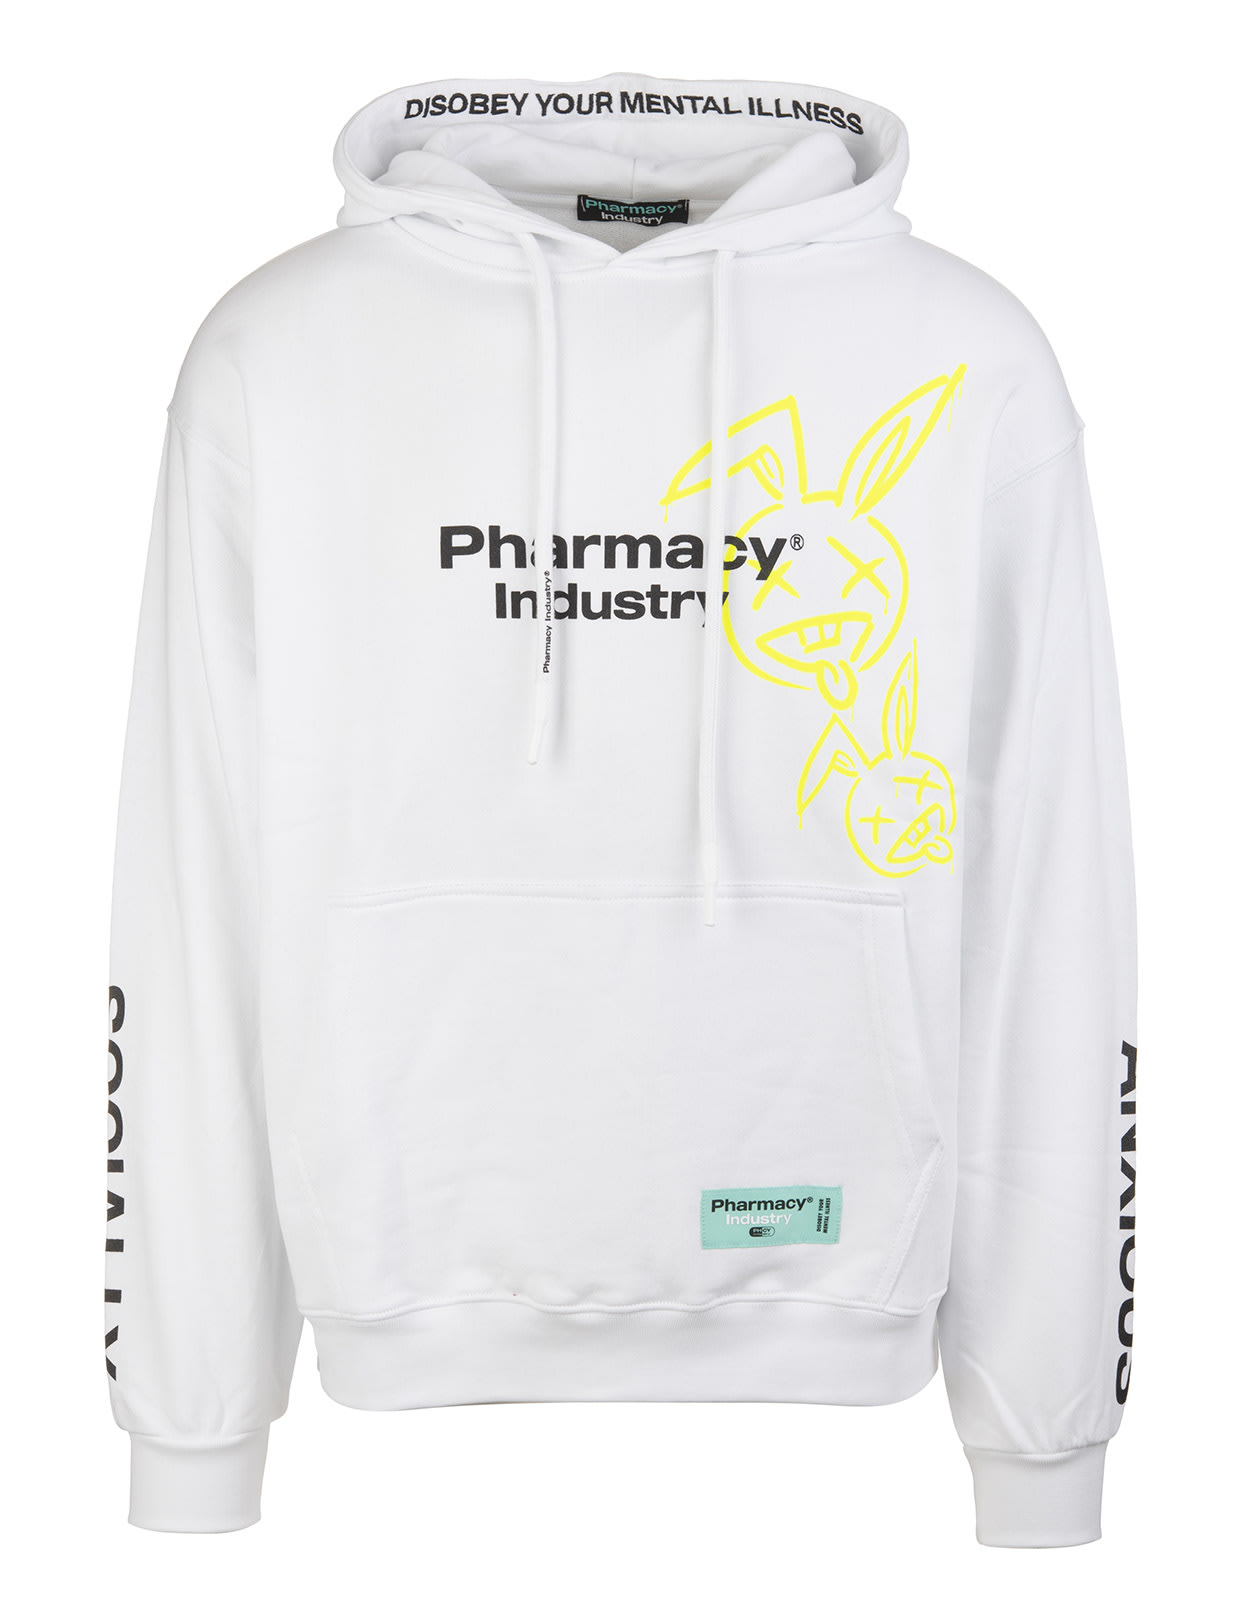 Pharmacy Industry Man White Logo Hoodie With Yellow Rabbits